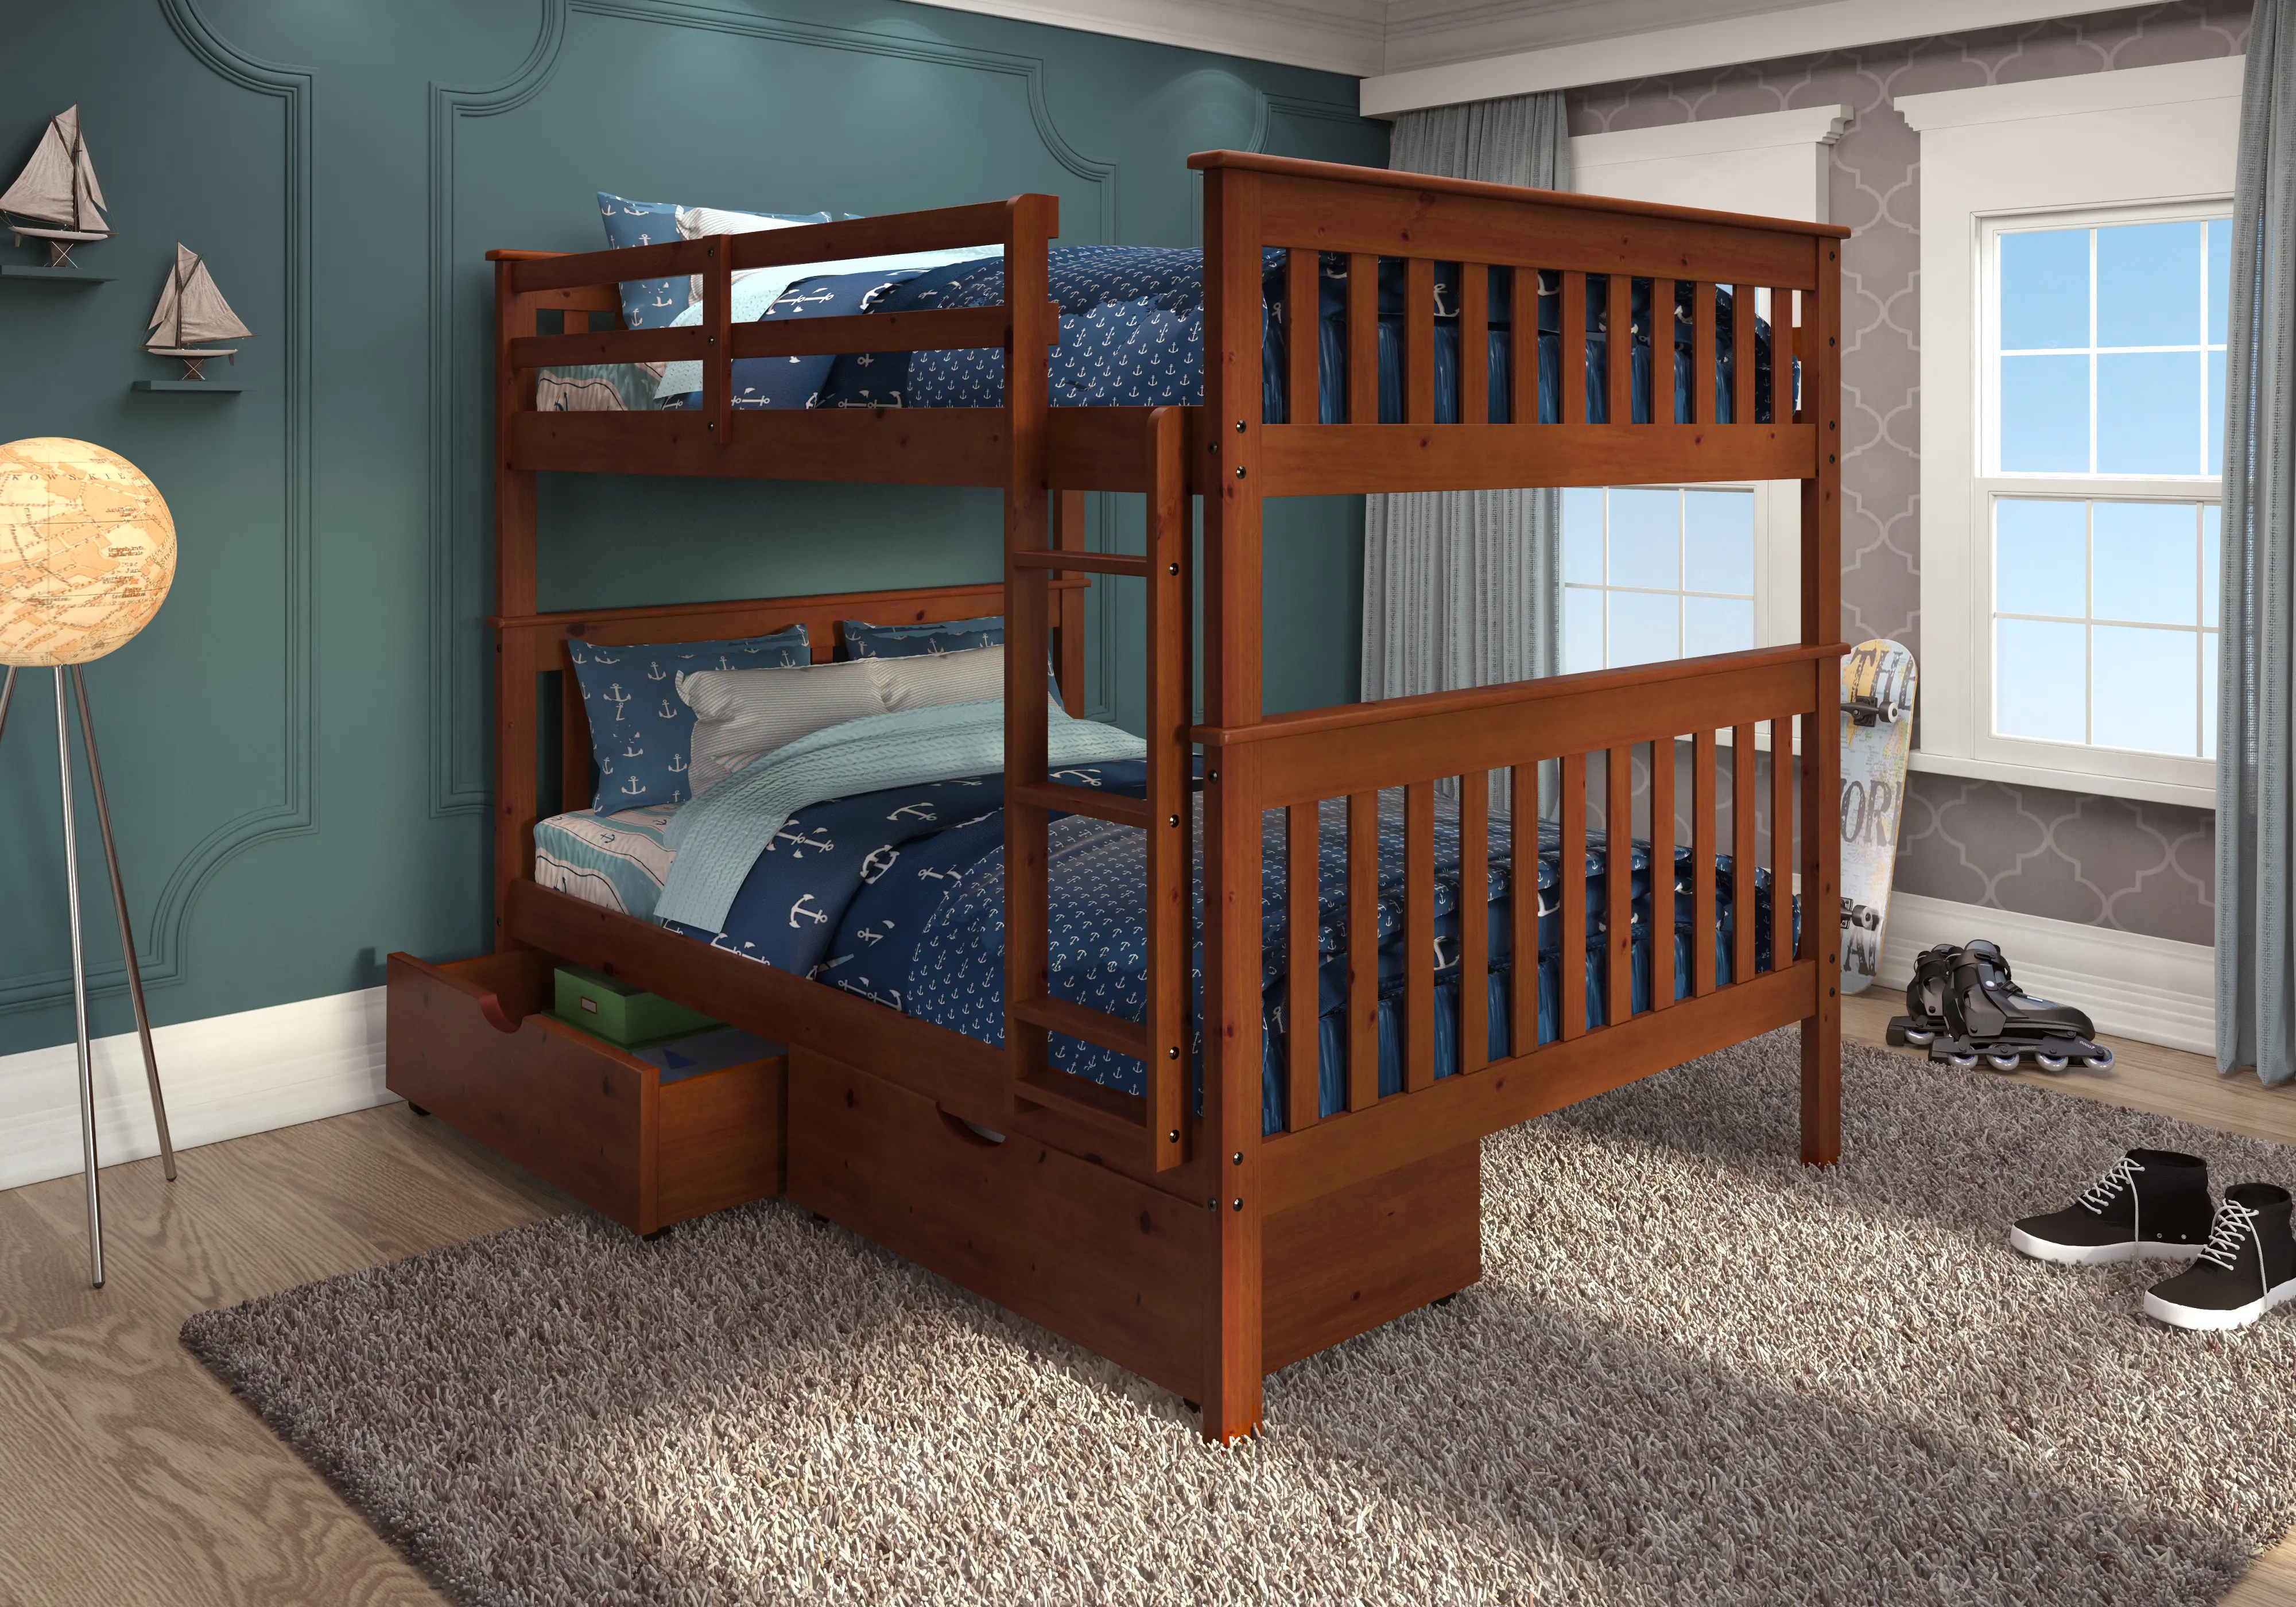 Craftsman Espresso Brown Full-over-Full Bunk Bed with Storage